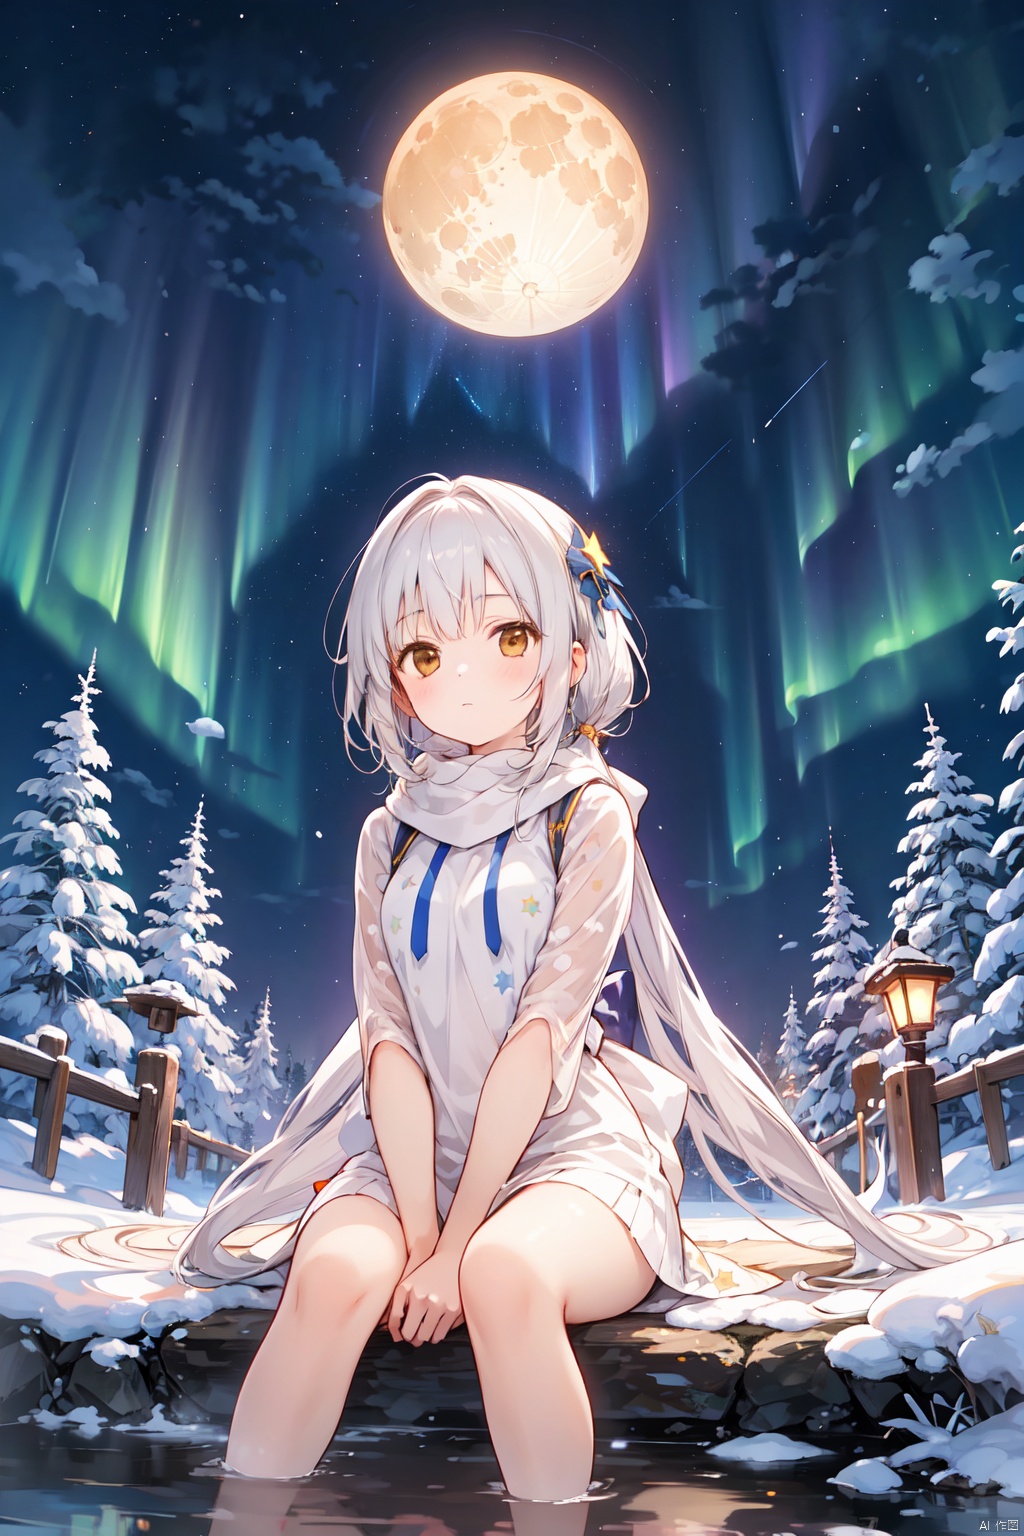  1girl, aerial_fireworks, aurora, bare_tree, bottomless, brown_eyes, city_lights, constellation, covering, covering_crotch, crescent_moon, dust, earth_\(planet\), fireflies, fireworks, full_moon, galaxy, lamppost, light_particles,looking_at_viewer, milky_way, moon, moonlight, night, night_sky, onsen, outdoors, pine_tree, planet, shooting_star, sitting, sky, snow, snowing, solo, space, starry_background, starry_sky, starry_sky_print, tanabata, tanzaku, tree, v_arms, window,white hair